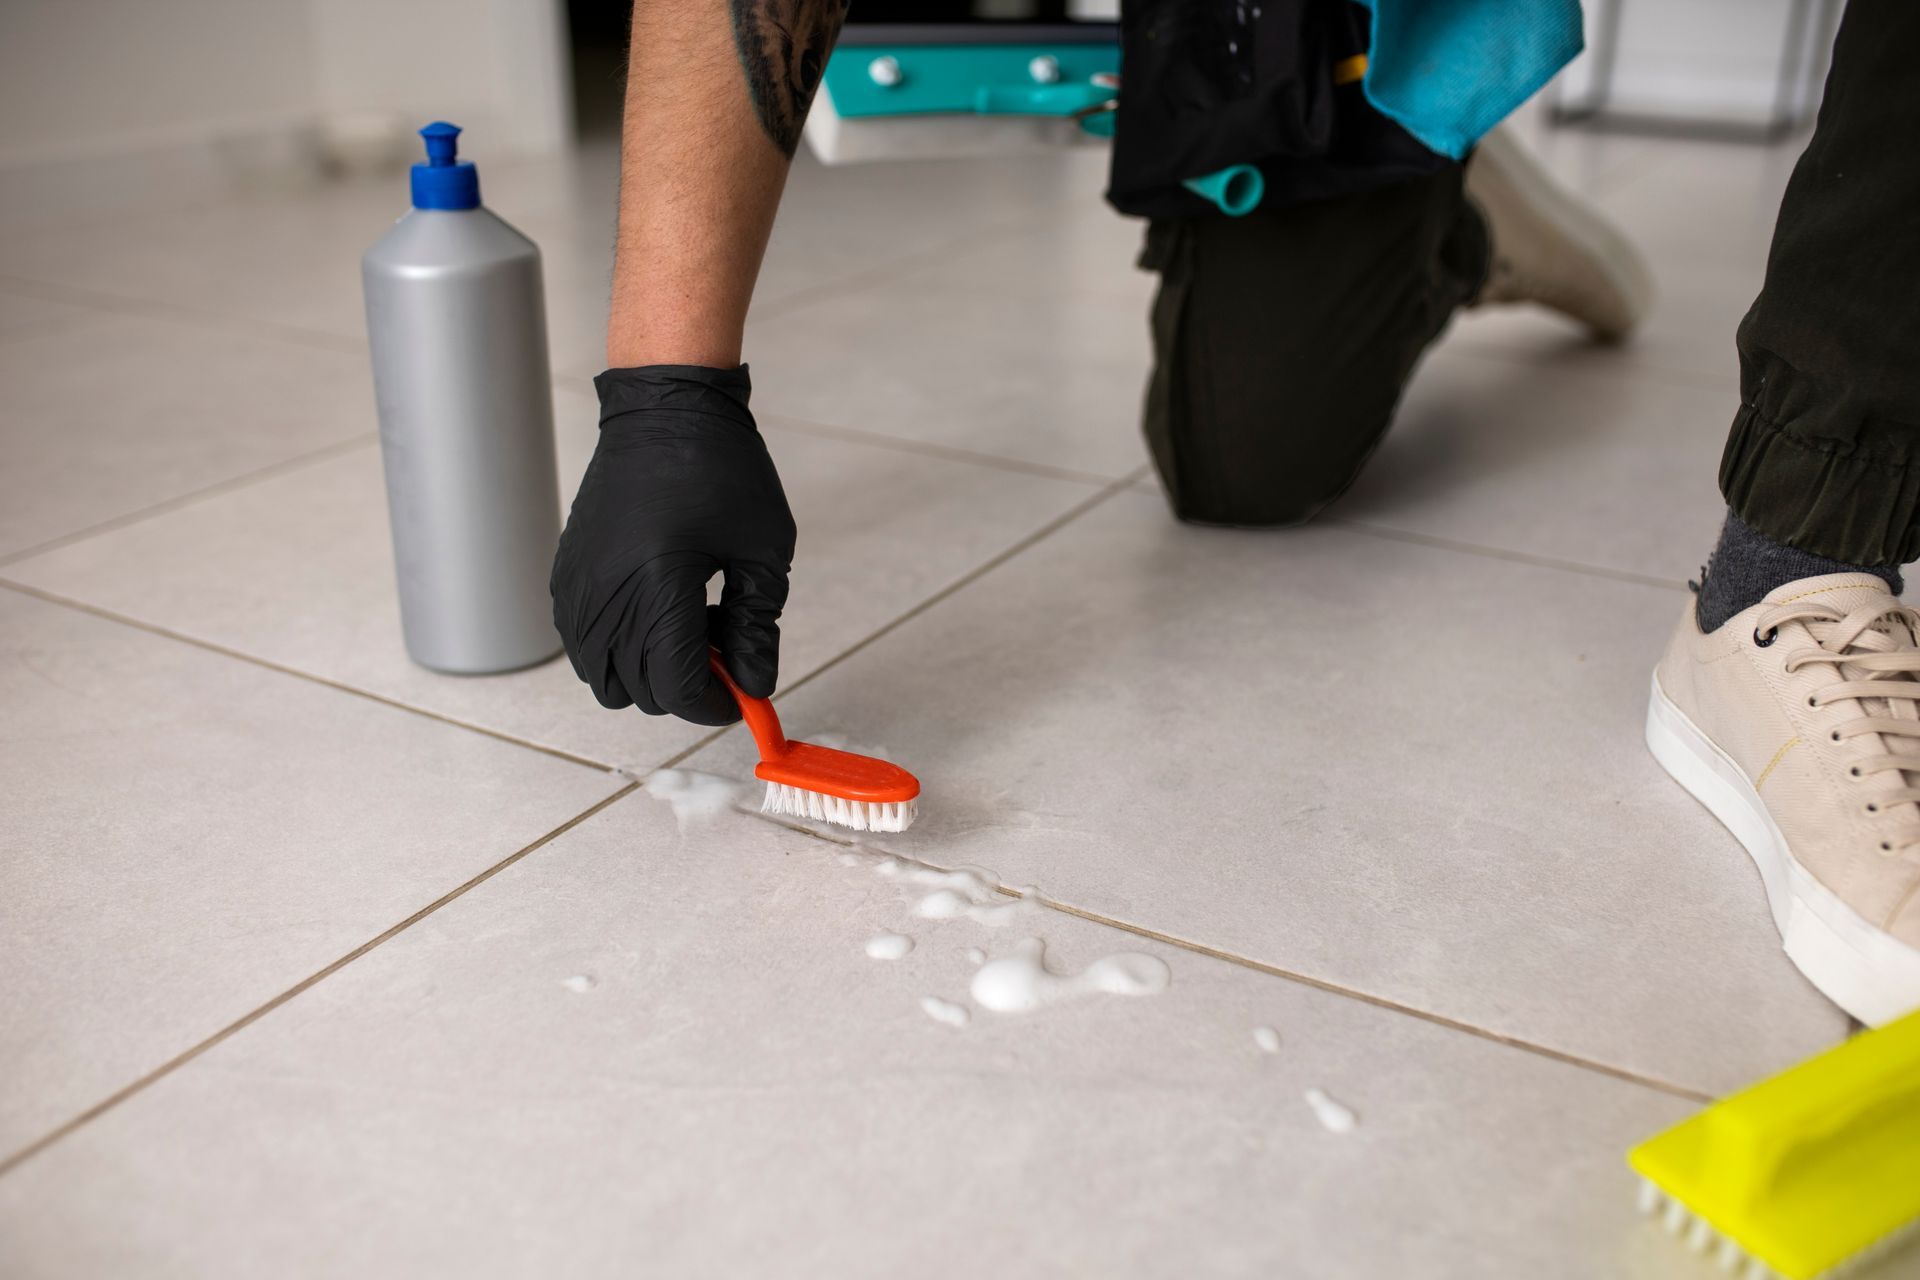 a person wearing black gloves is cleaning the floor with a red brush